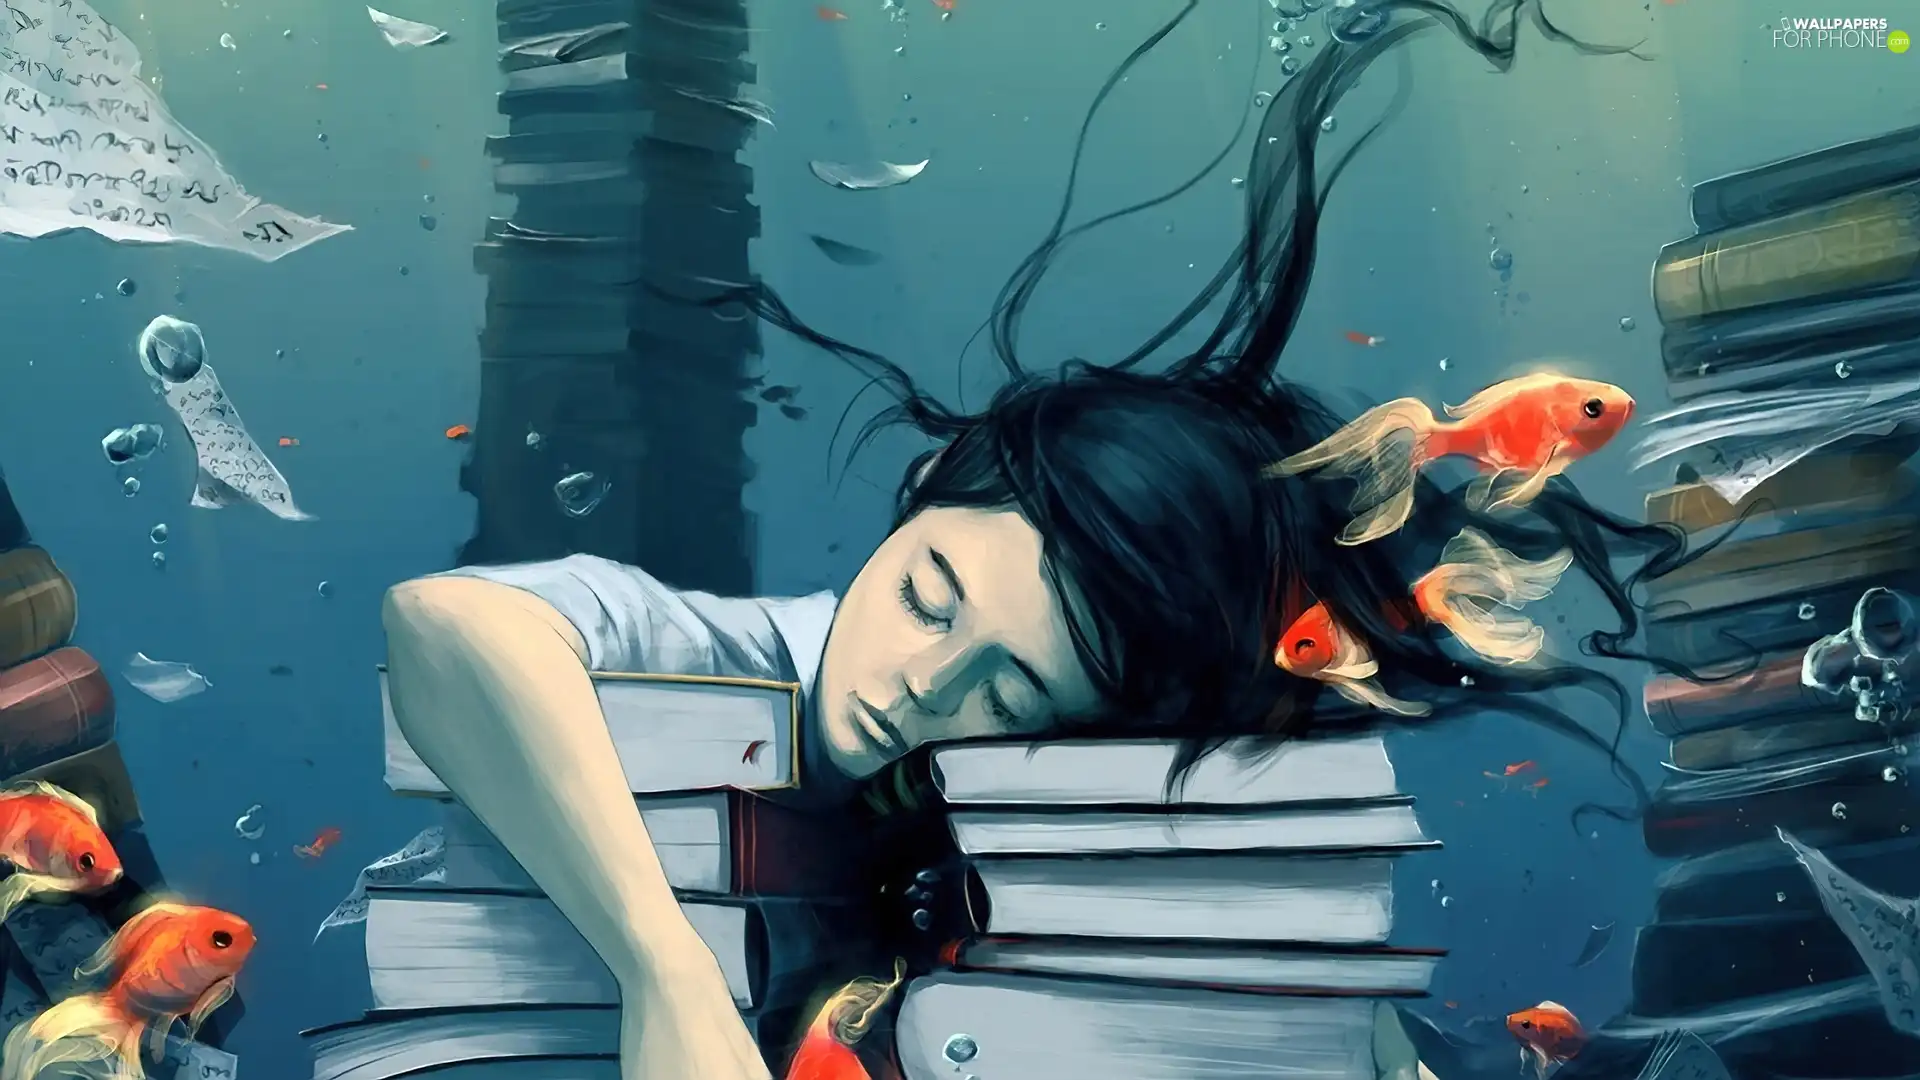 the sleeping, Books, fishes, girl